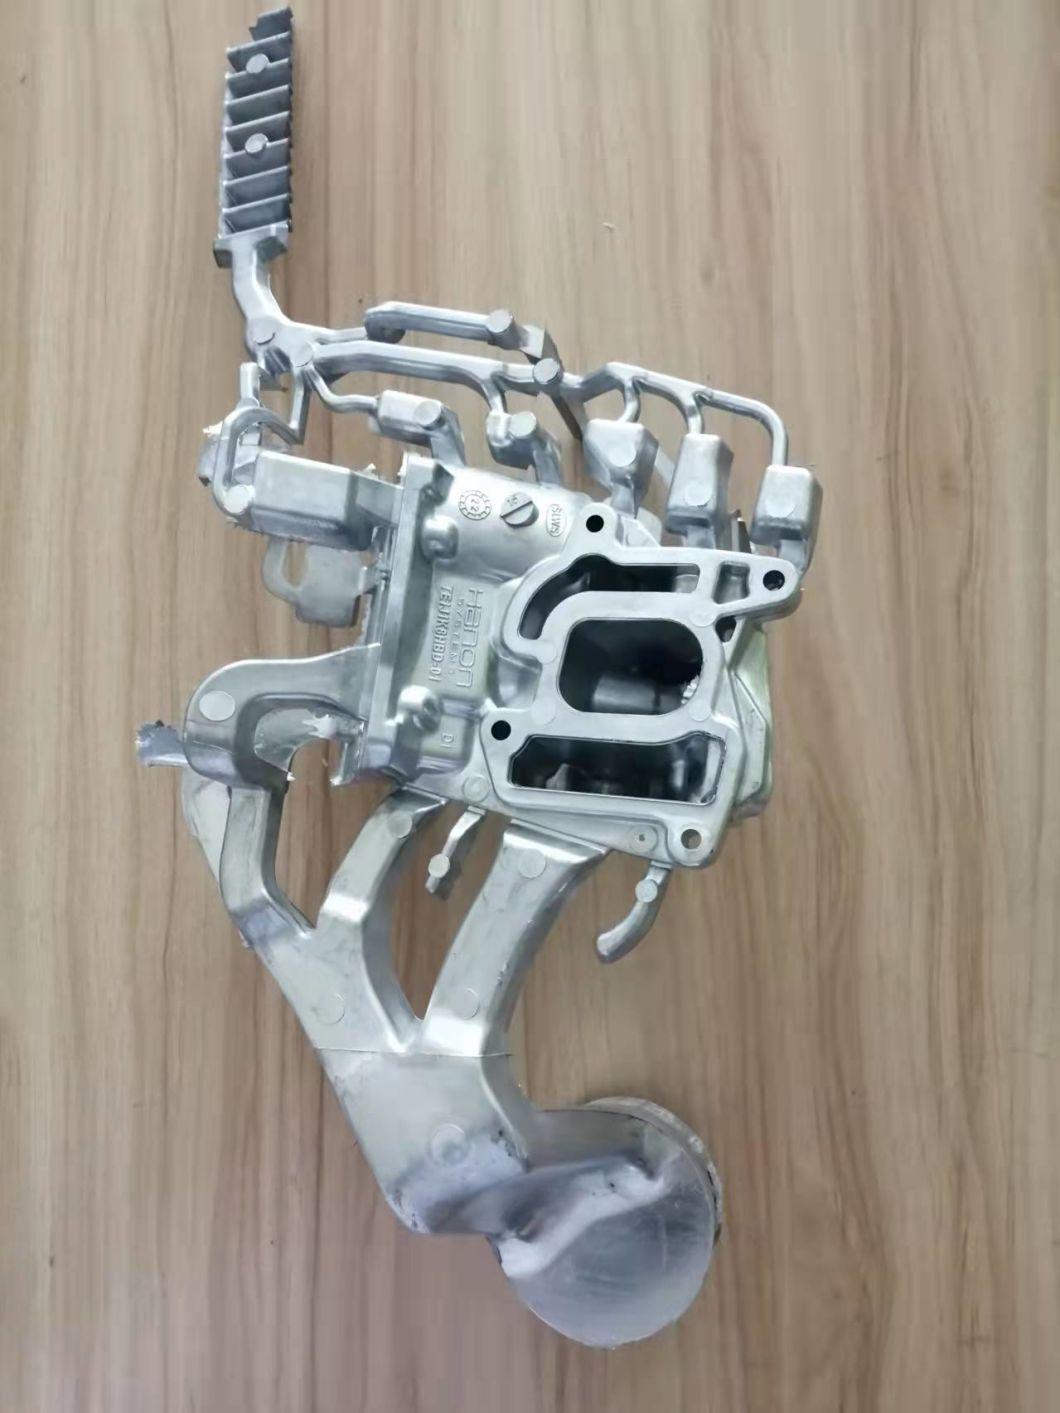 Valve Housing Alloy Customized Aluminum CNC&Polishing Mobile Diecasting Parts for Motor Cycle